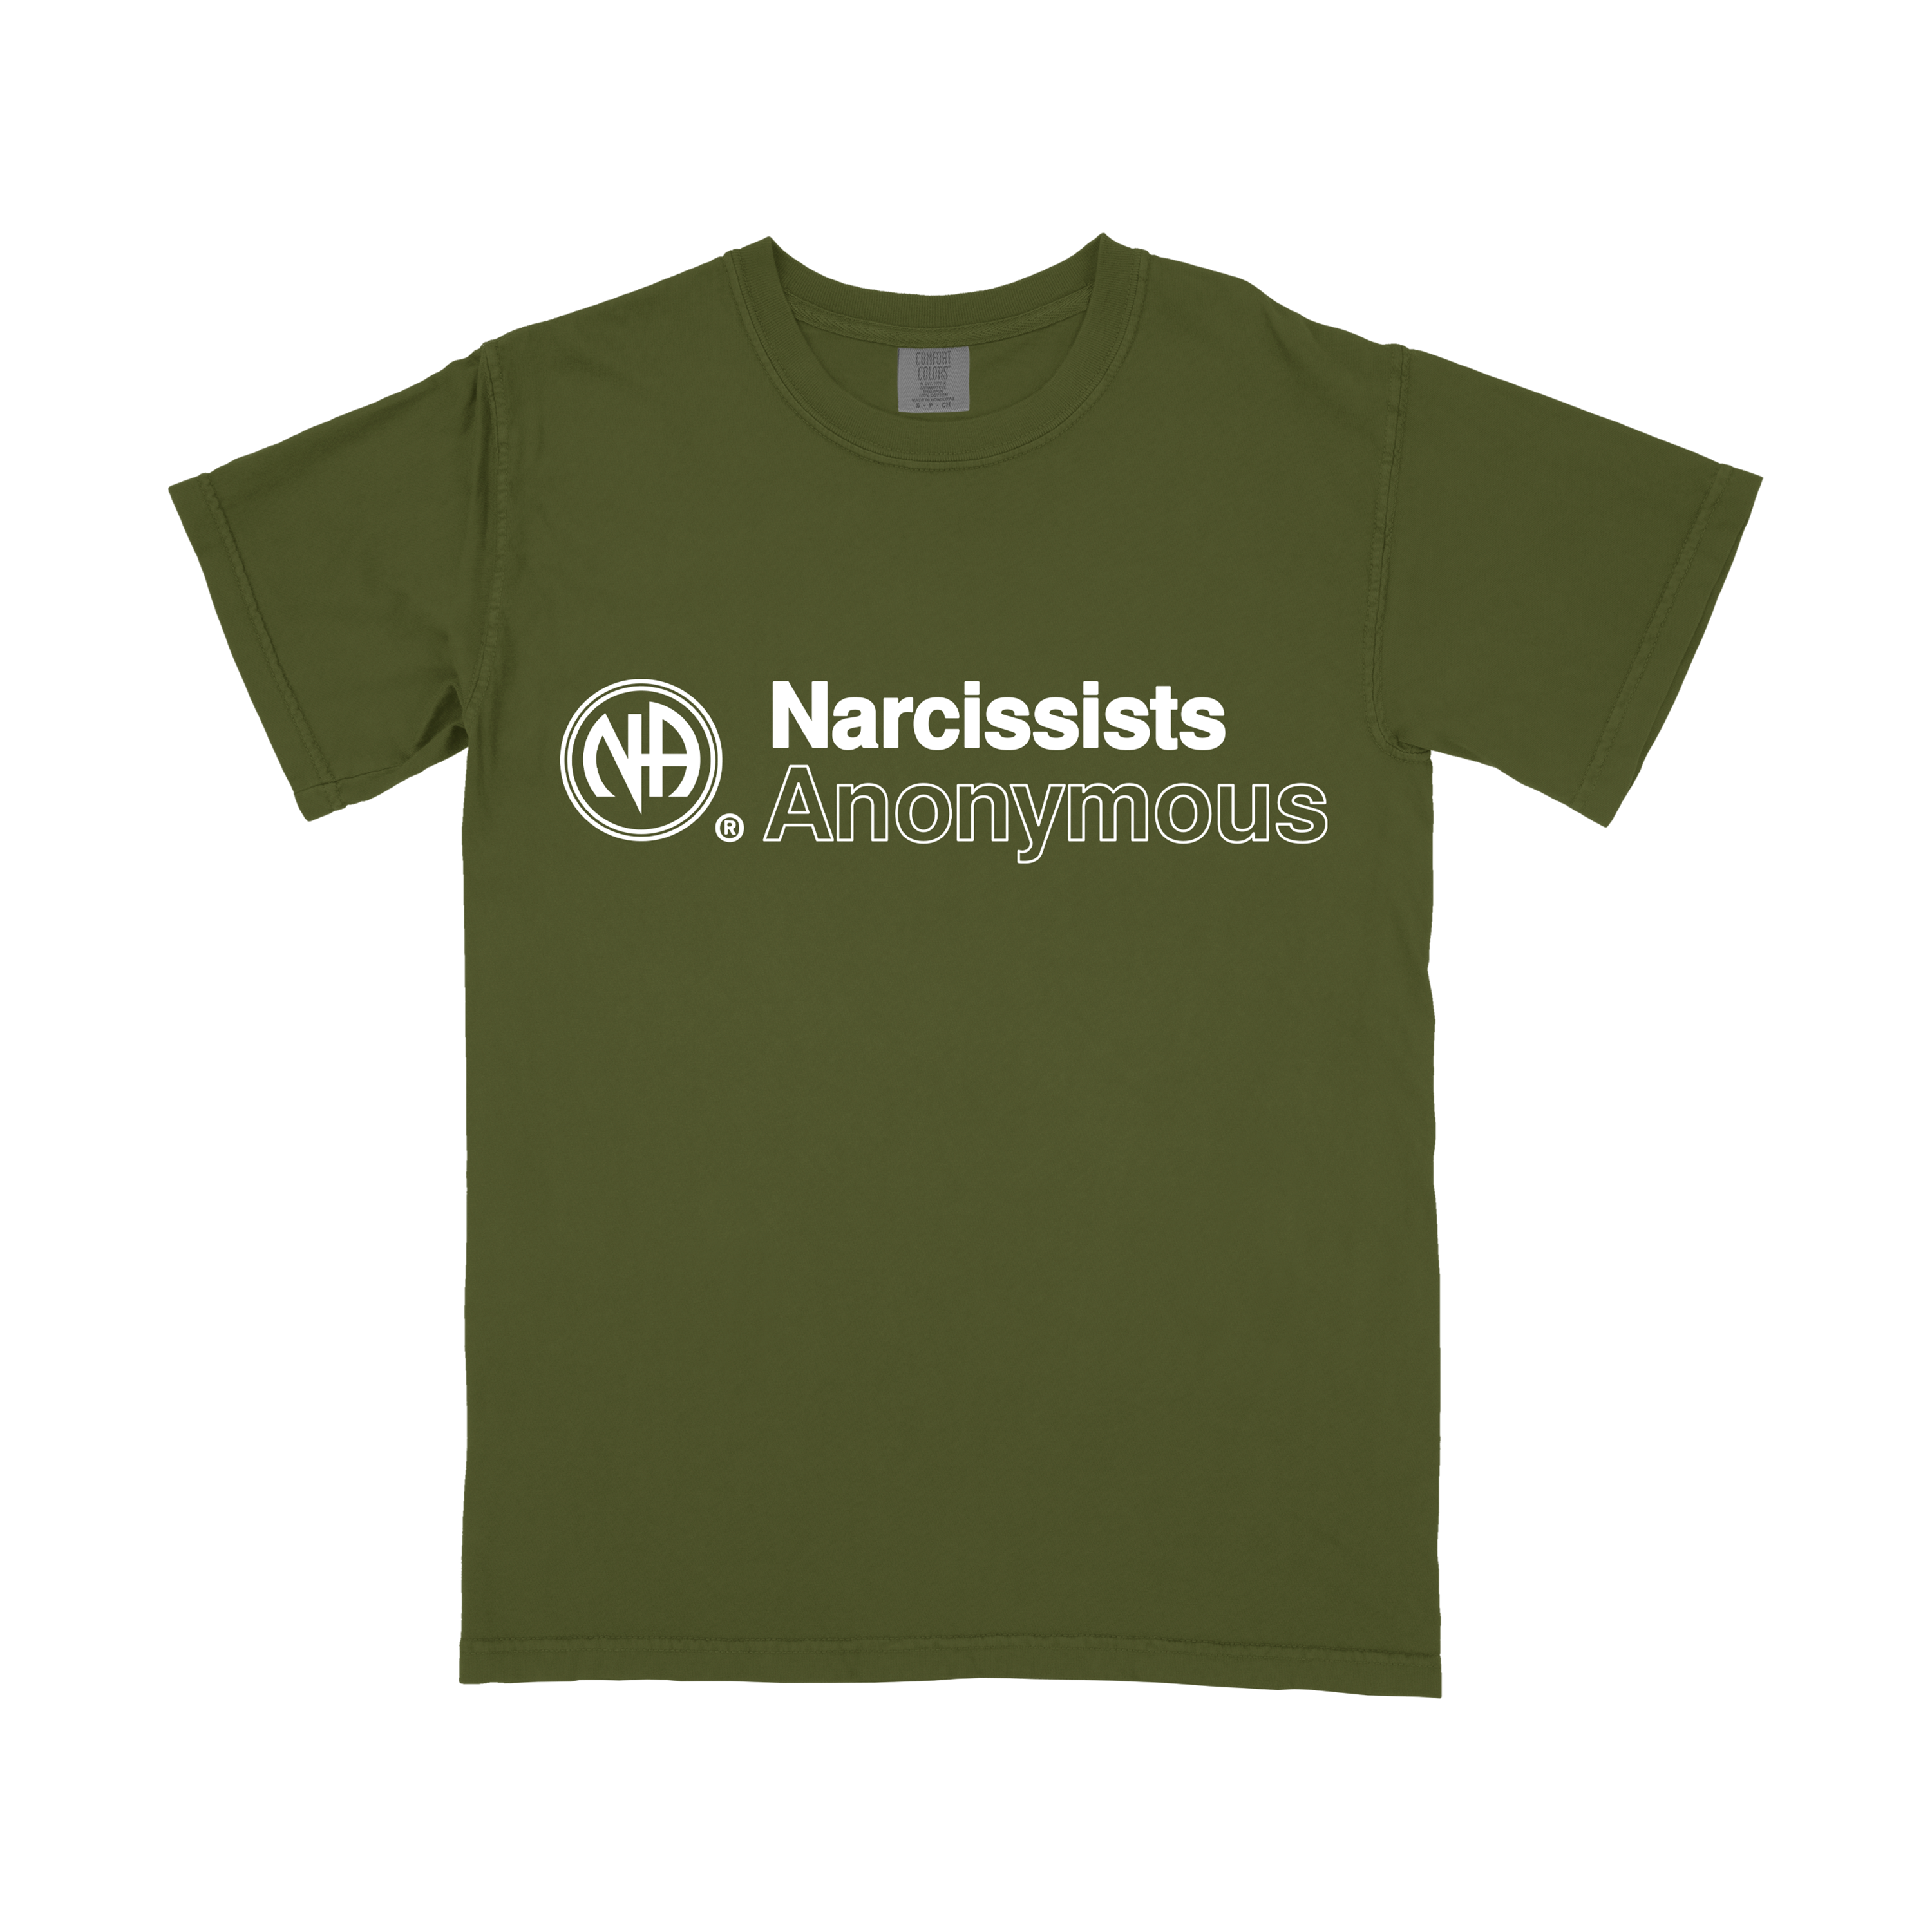 "Narcissist Anonymous" t-shirt